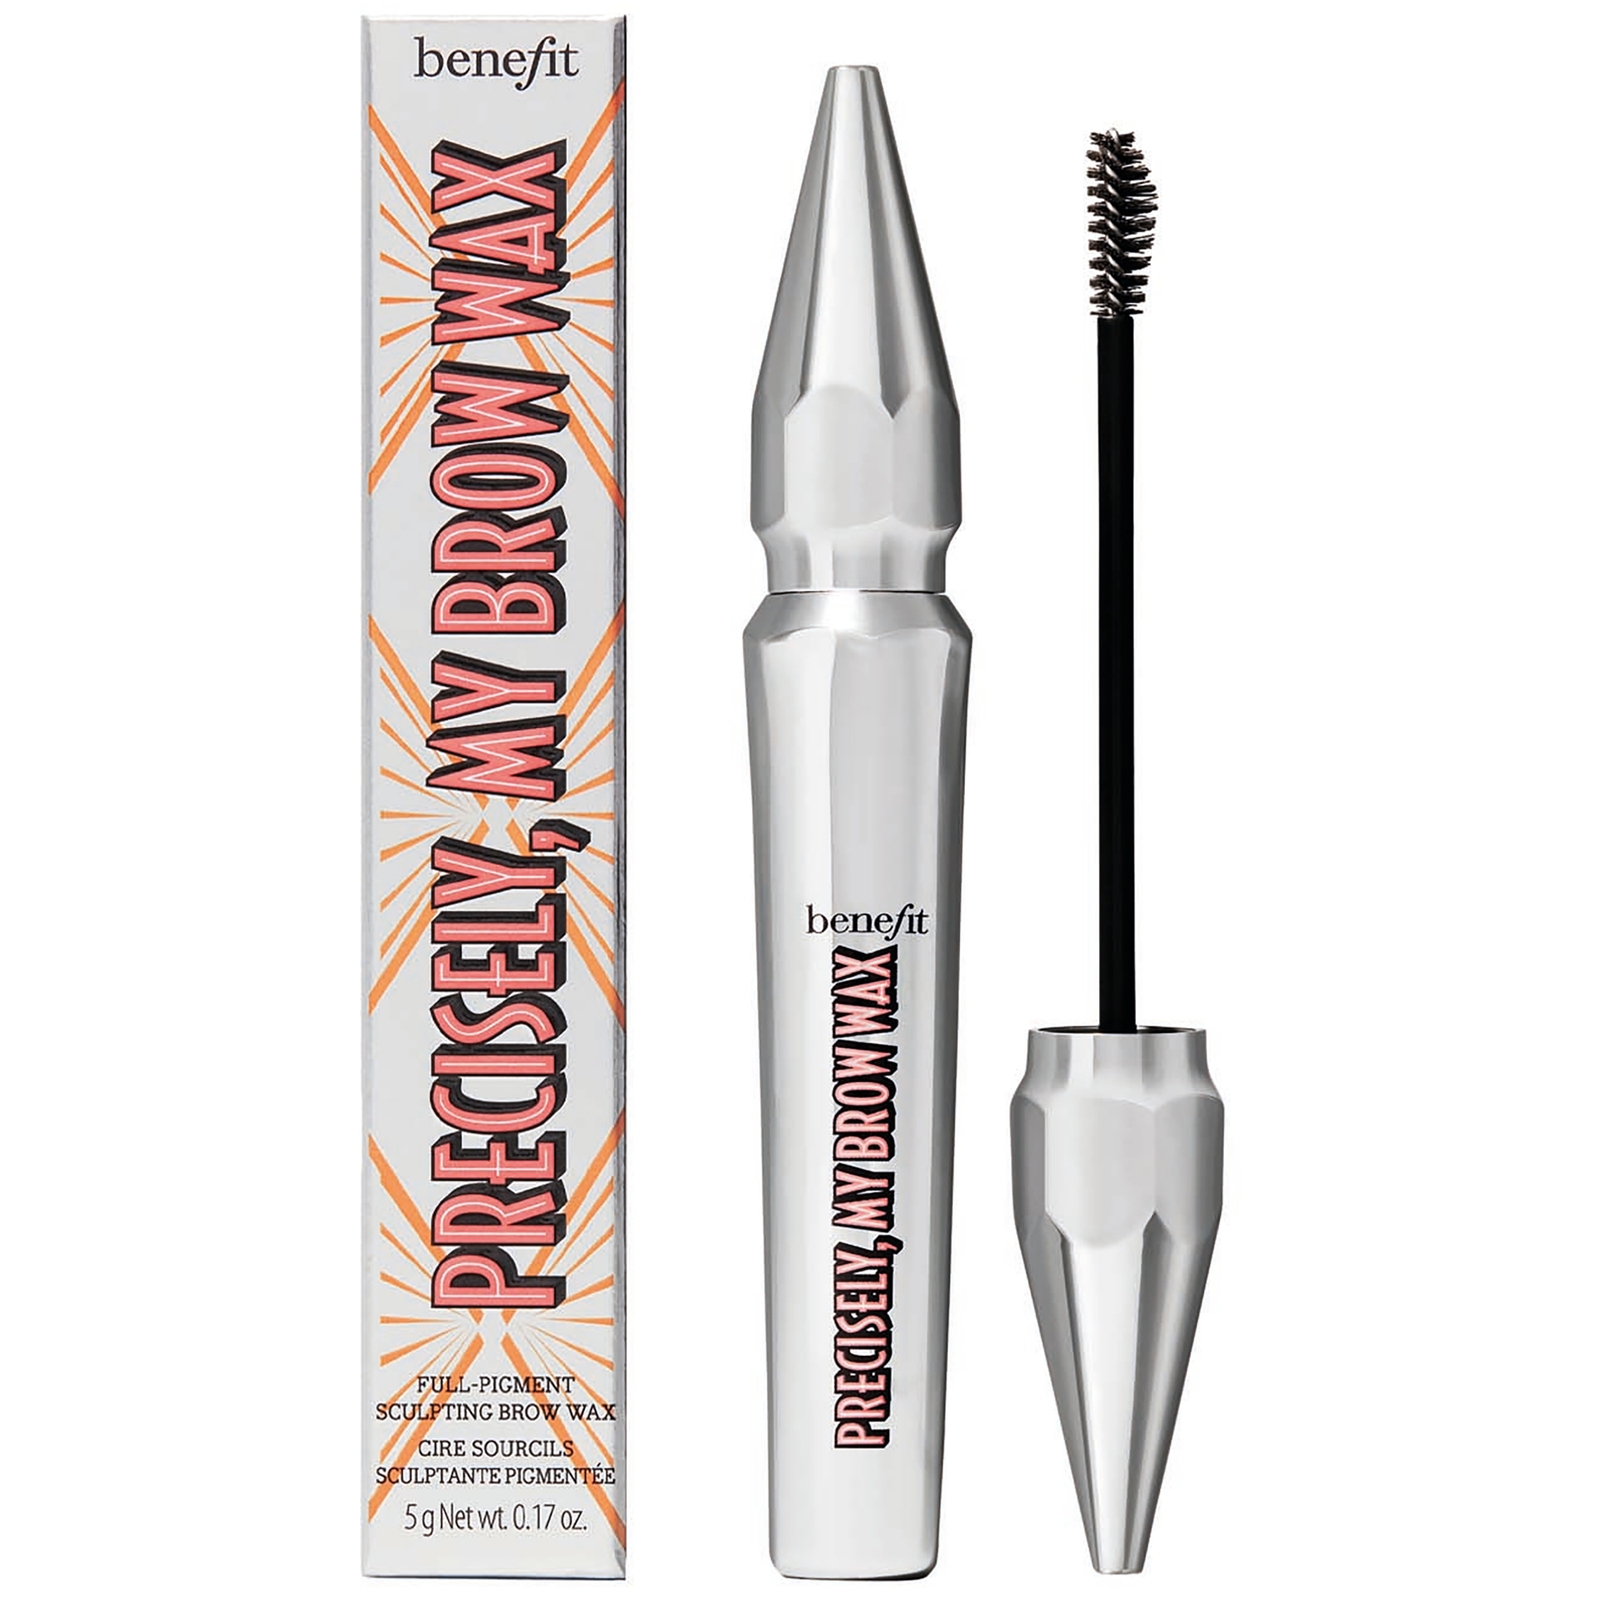 Photos - Eye / Eyebrow Pencil Benefit Precisely My Brow Full Pigment Sculpting Brow Wax 5g (Various Shad 